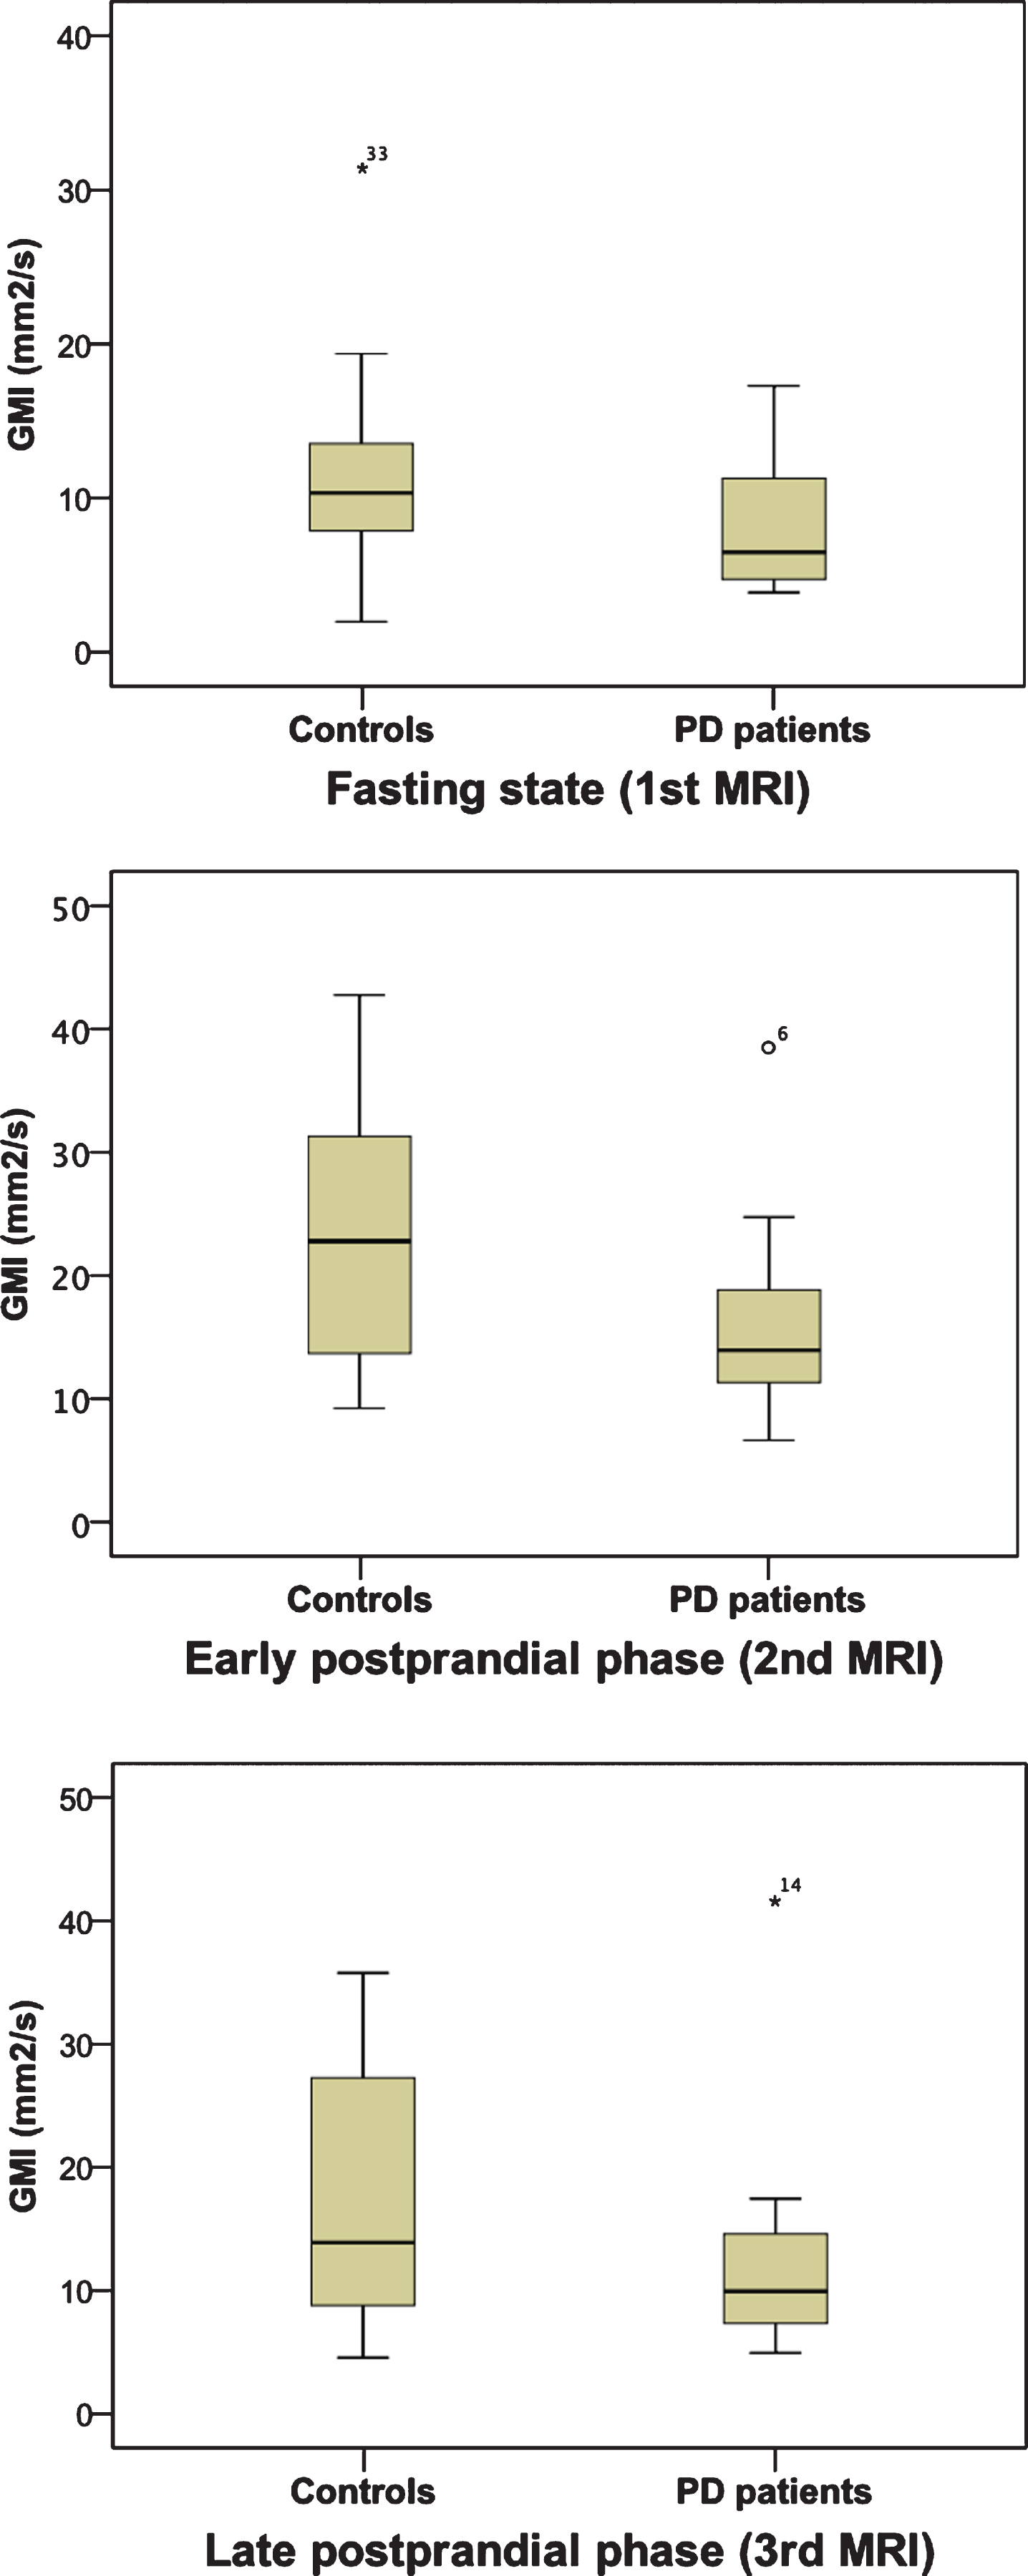 Gastric motility indices (GMI) for controls and PD patients before (1st MRI) and after (2nd and 3rd MRI) a standardized test meal visualized as boxplots.